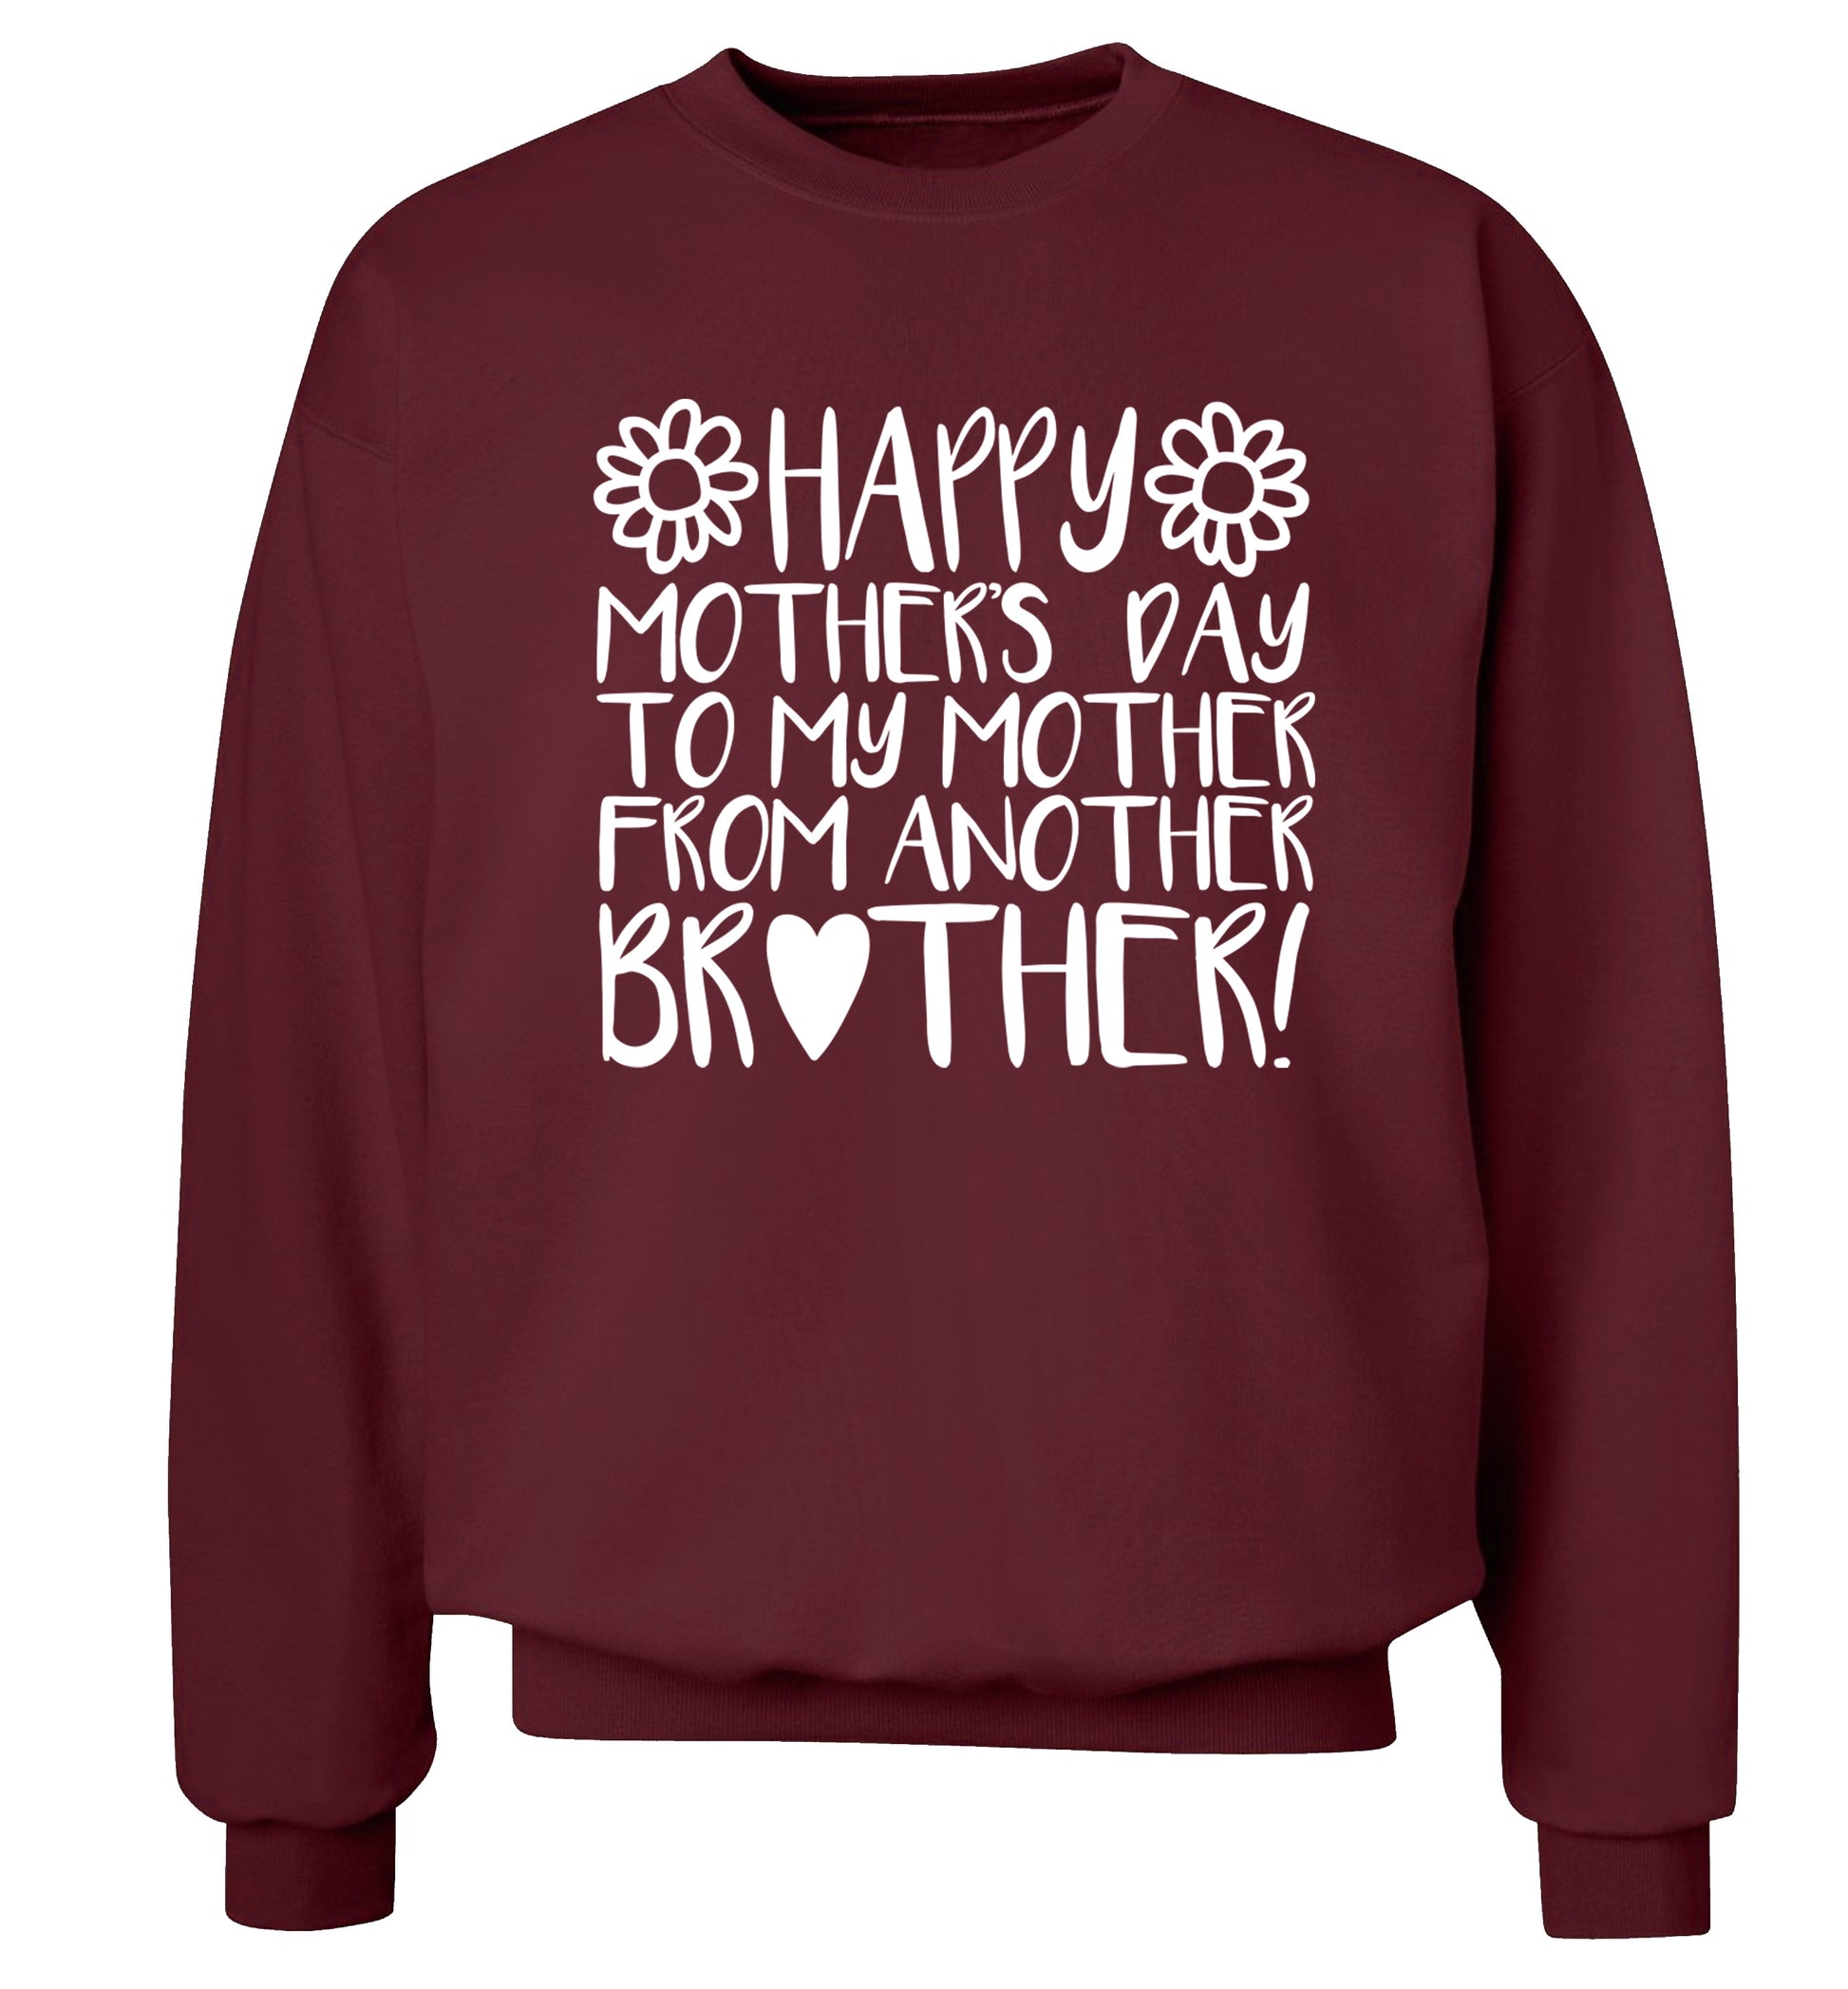 Happy mother's day to my mother from another brother Adult's unisex maroon Sweater 2XL